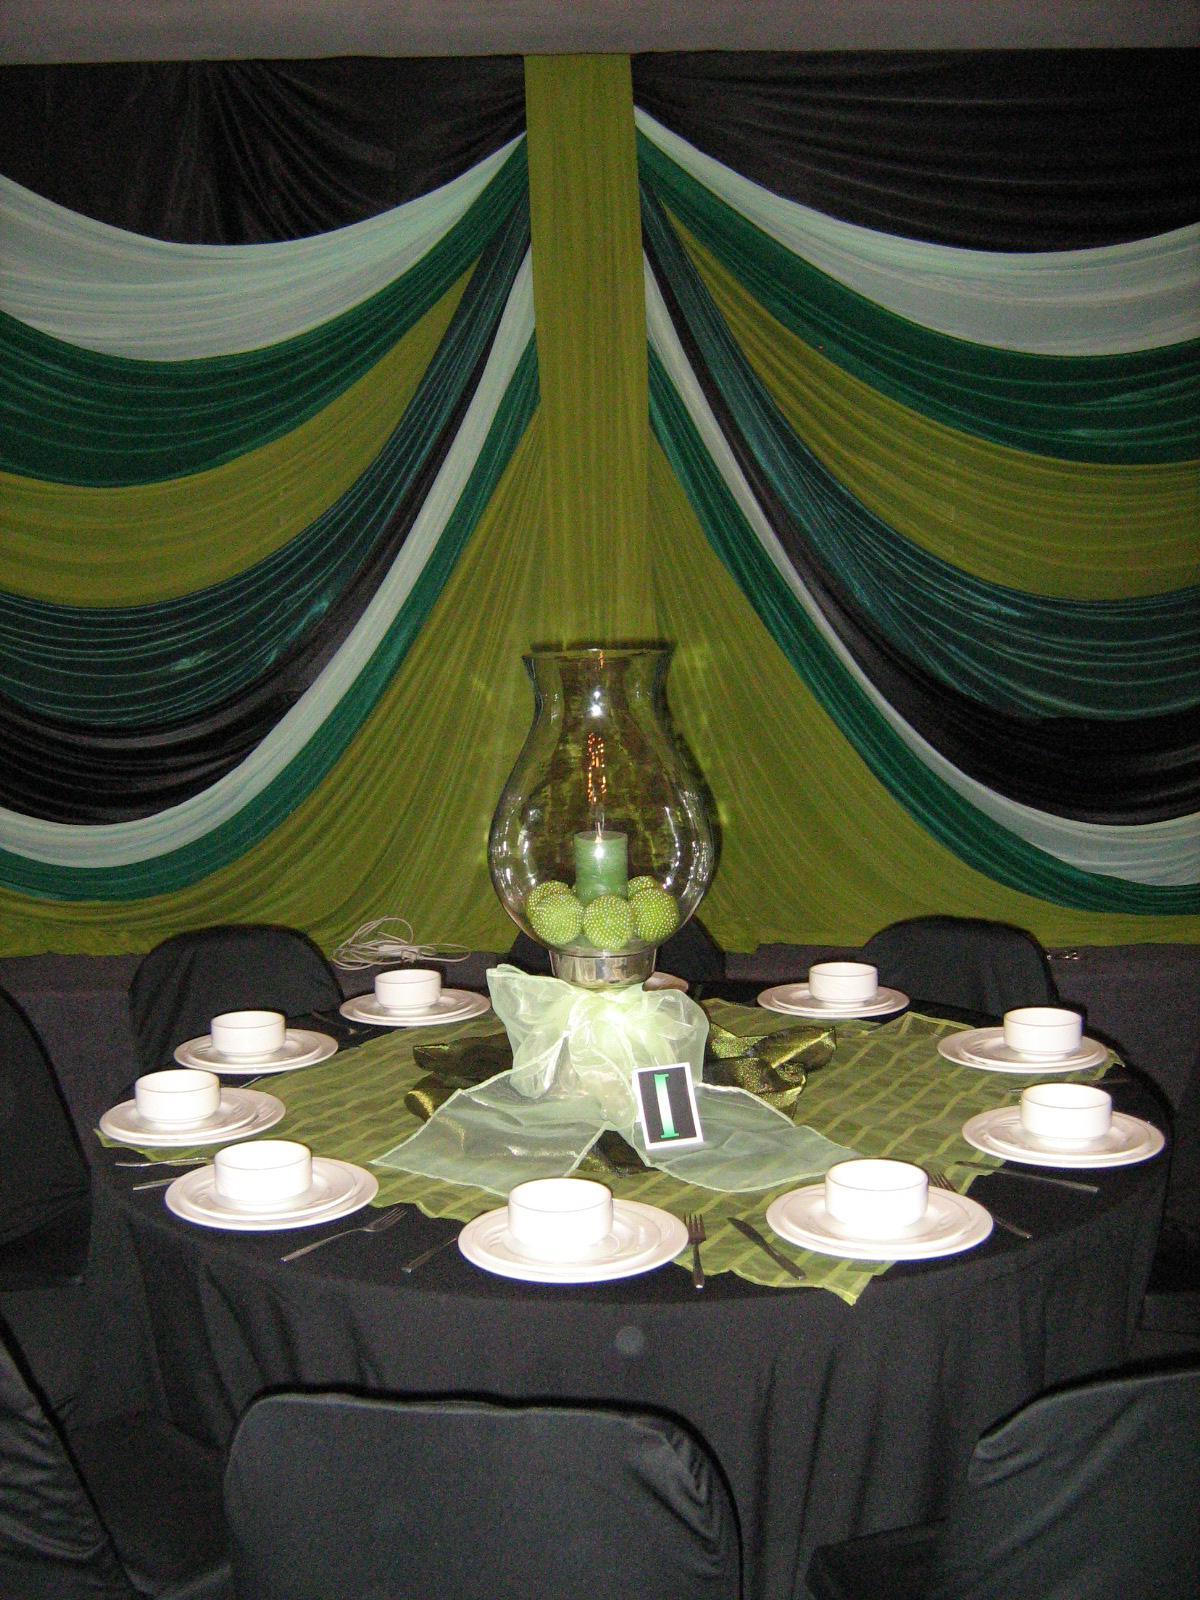 Cape Town: Flowers and Drapes for Weddings and Other Events!